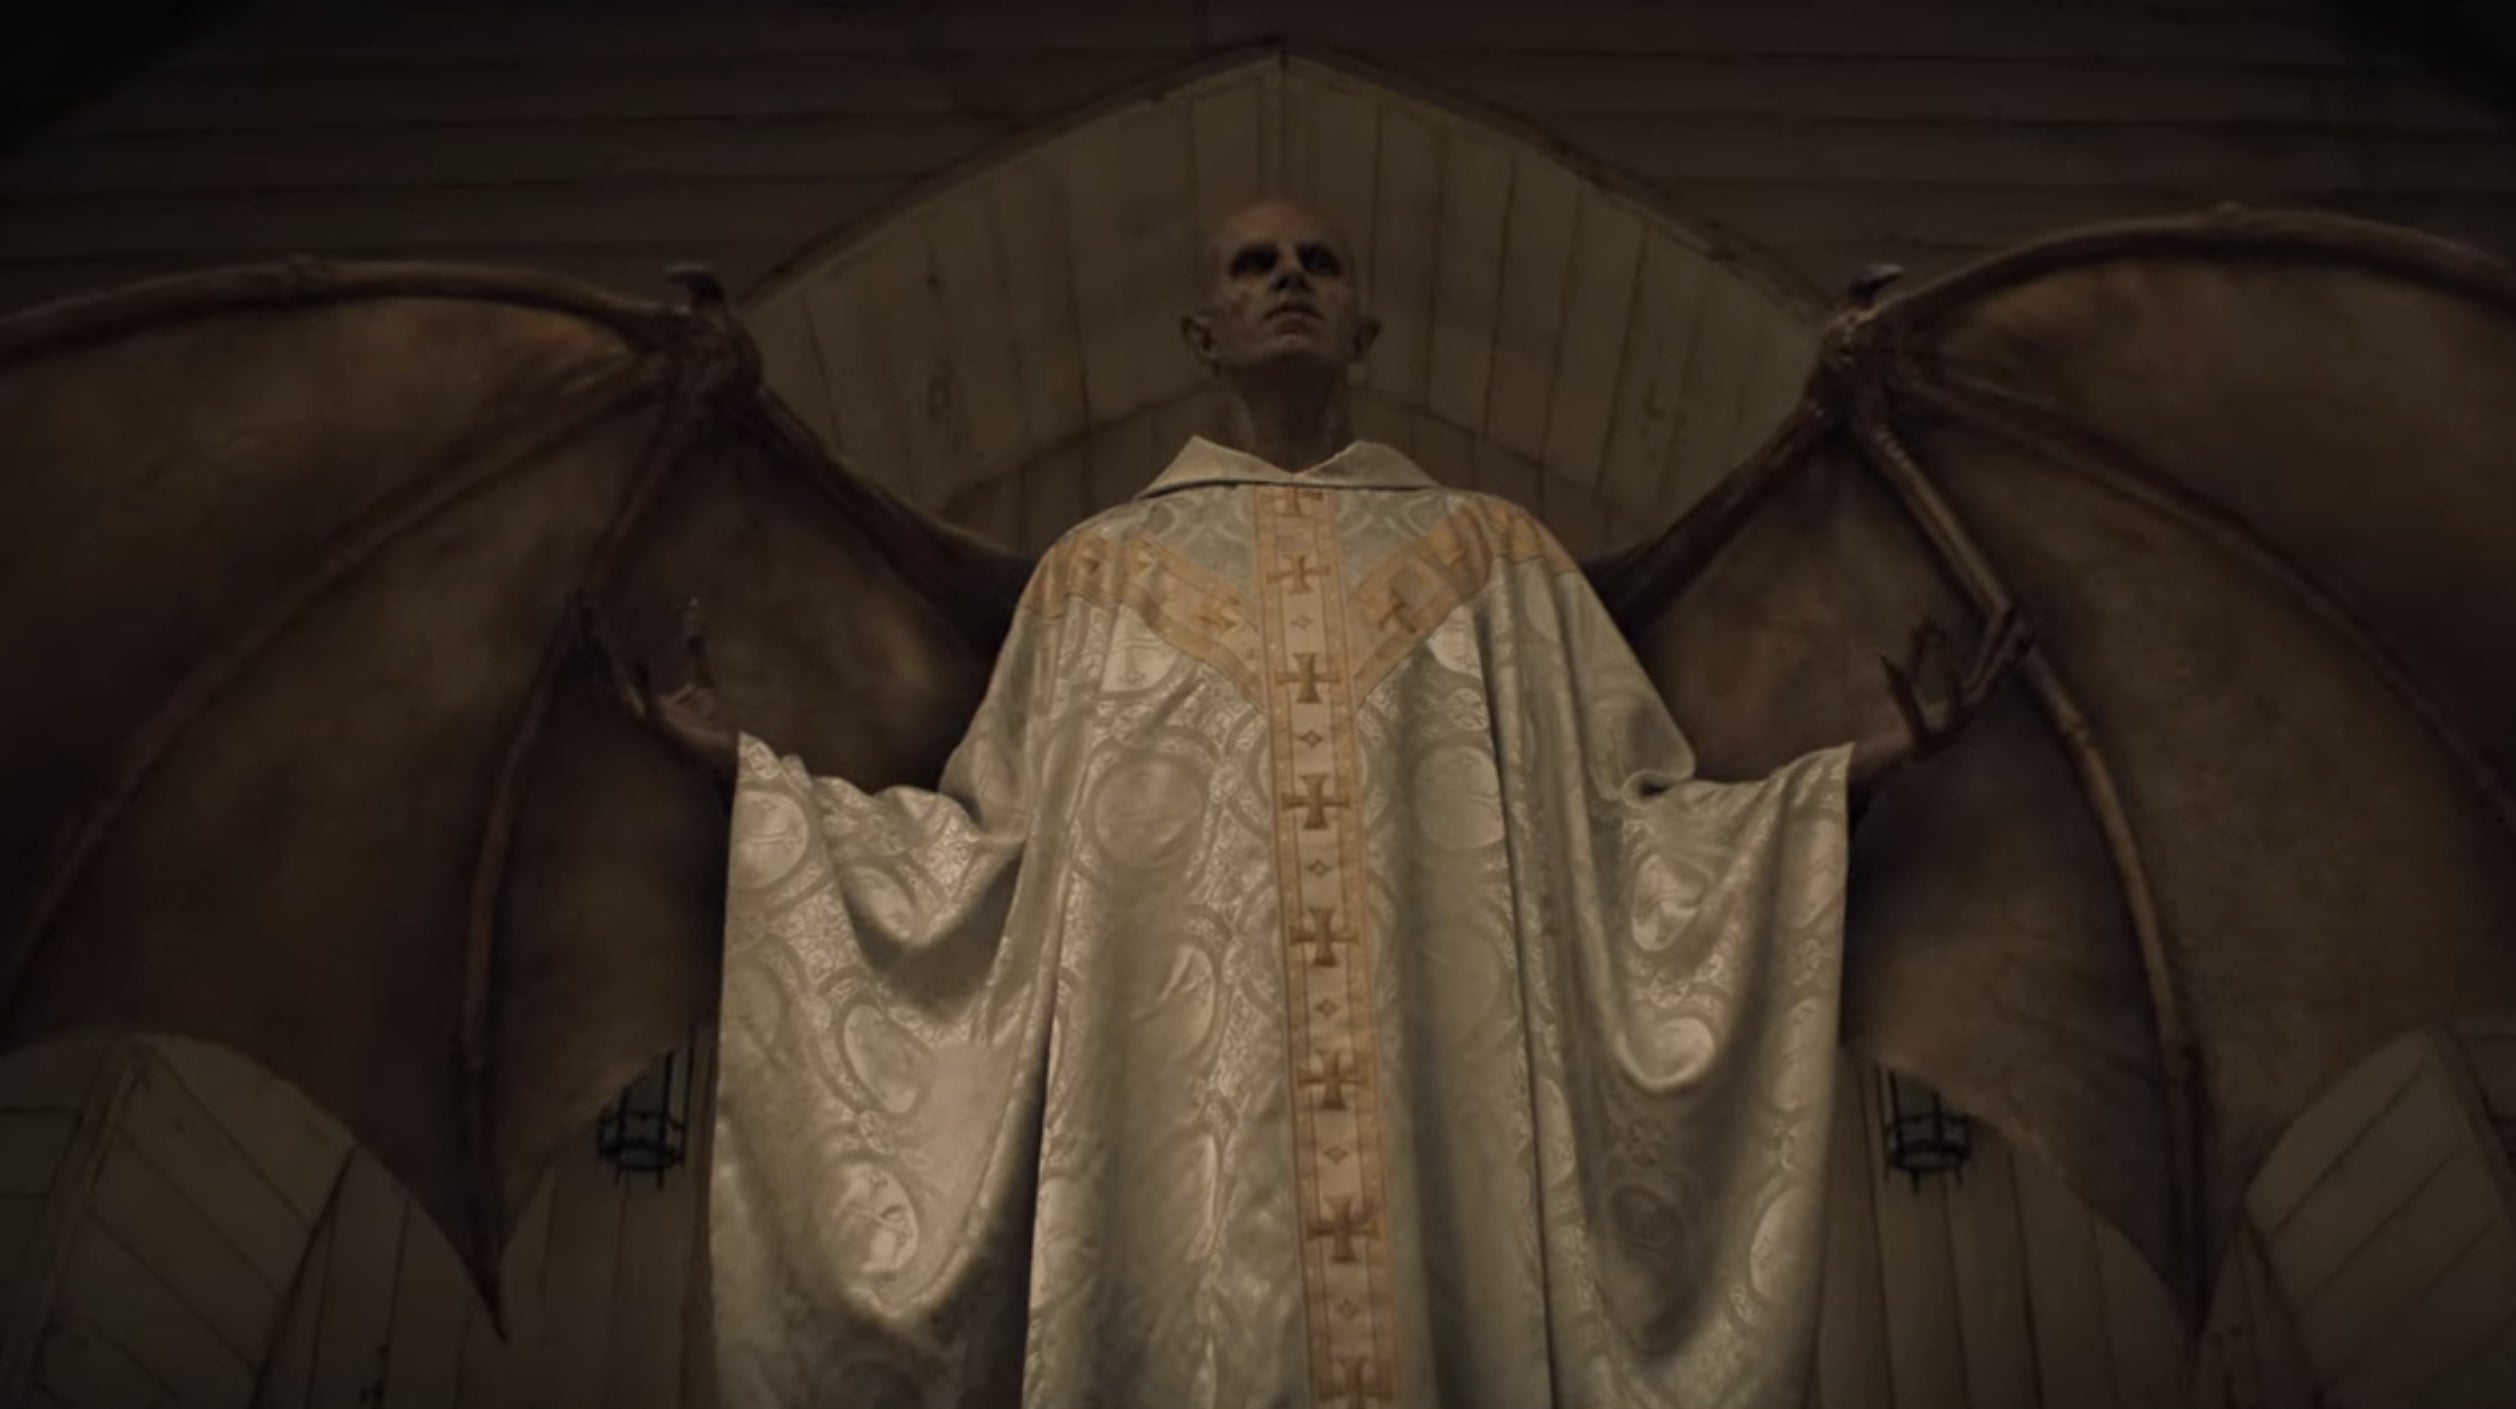 The Angel in the church in &quot;Midnight Mass&quot;